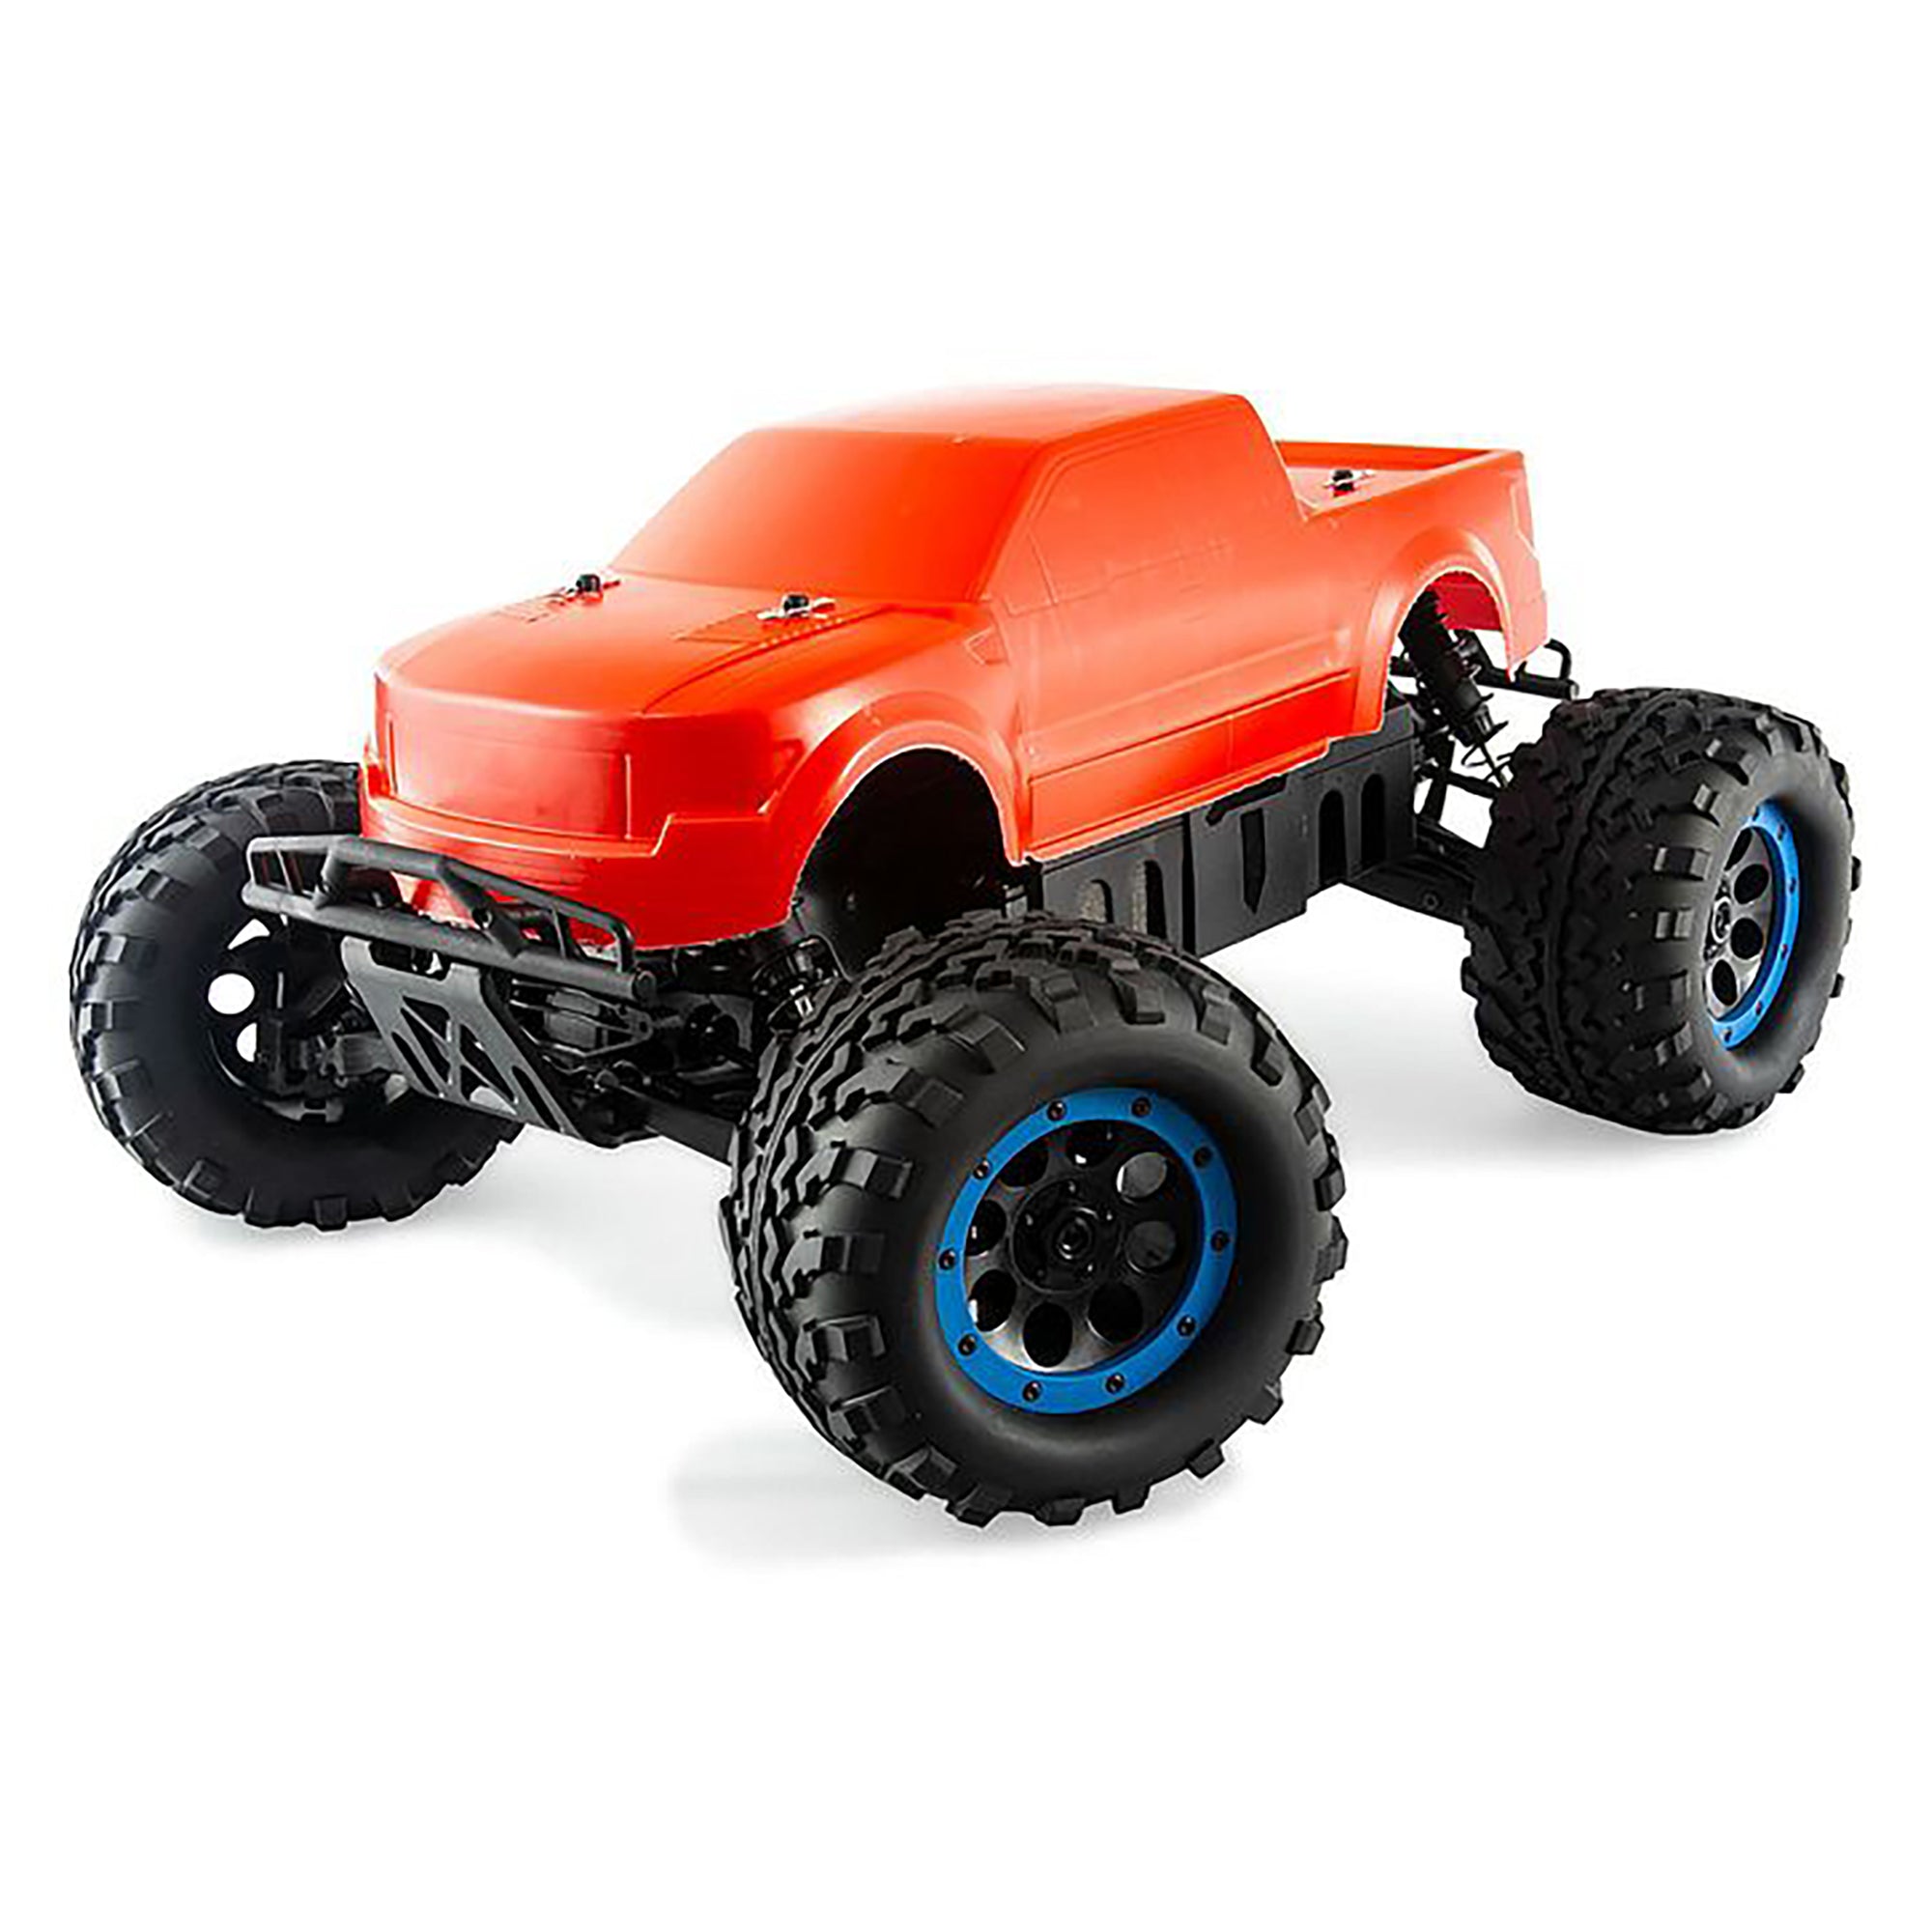 King Motor Tyrant II Brushless 1/8 Scale 4WD RC Monster Truck